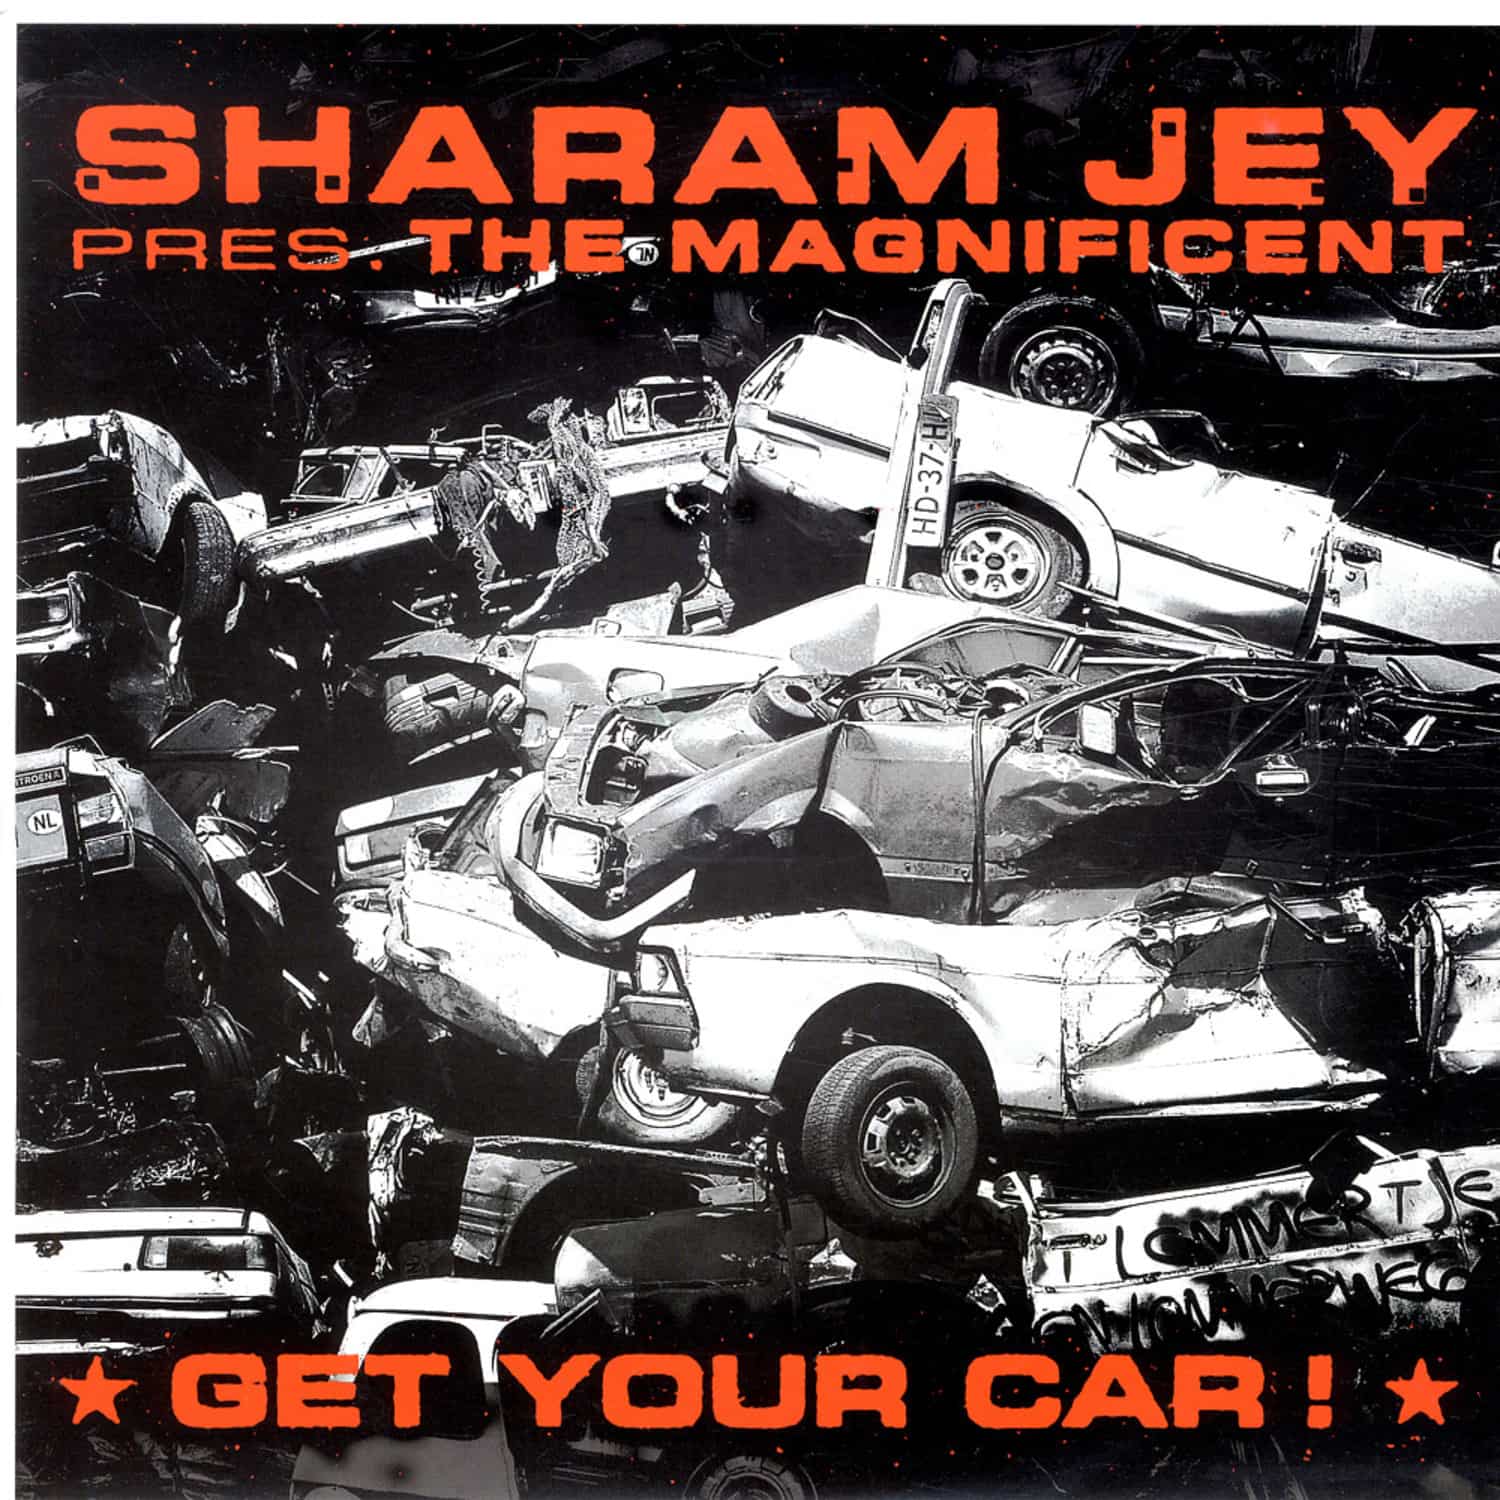 Sharam Jey pres. The Magnifice - GET YOUR CAR!